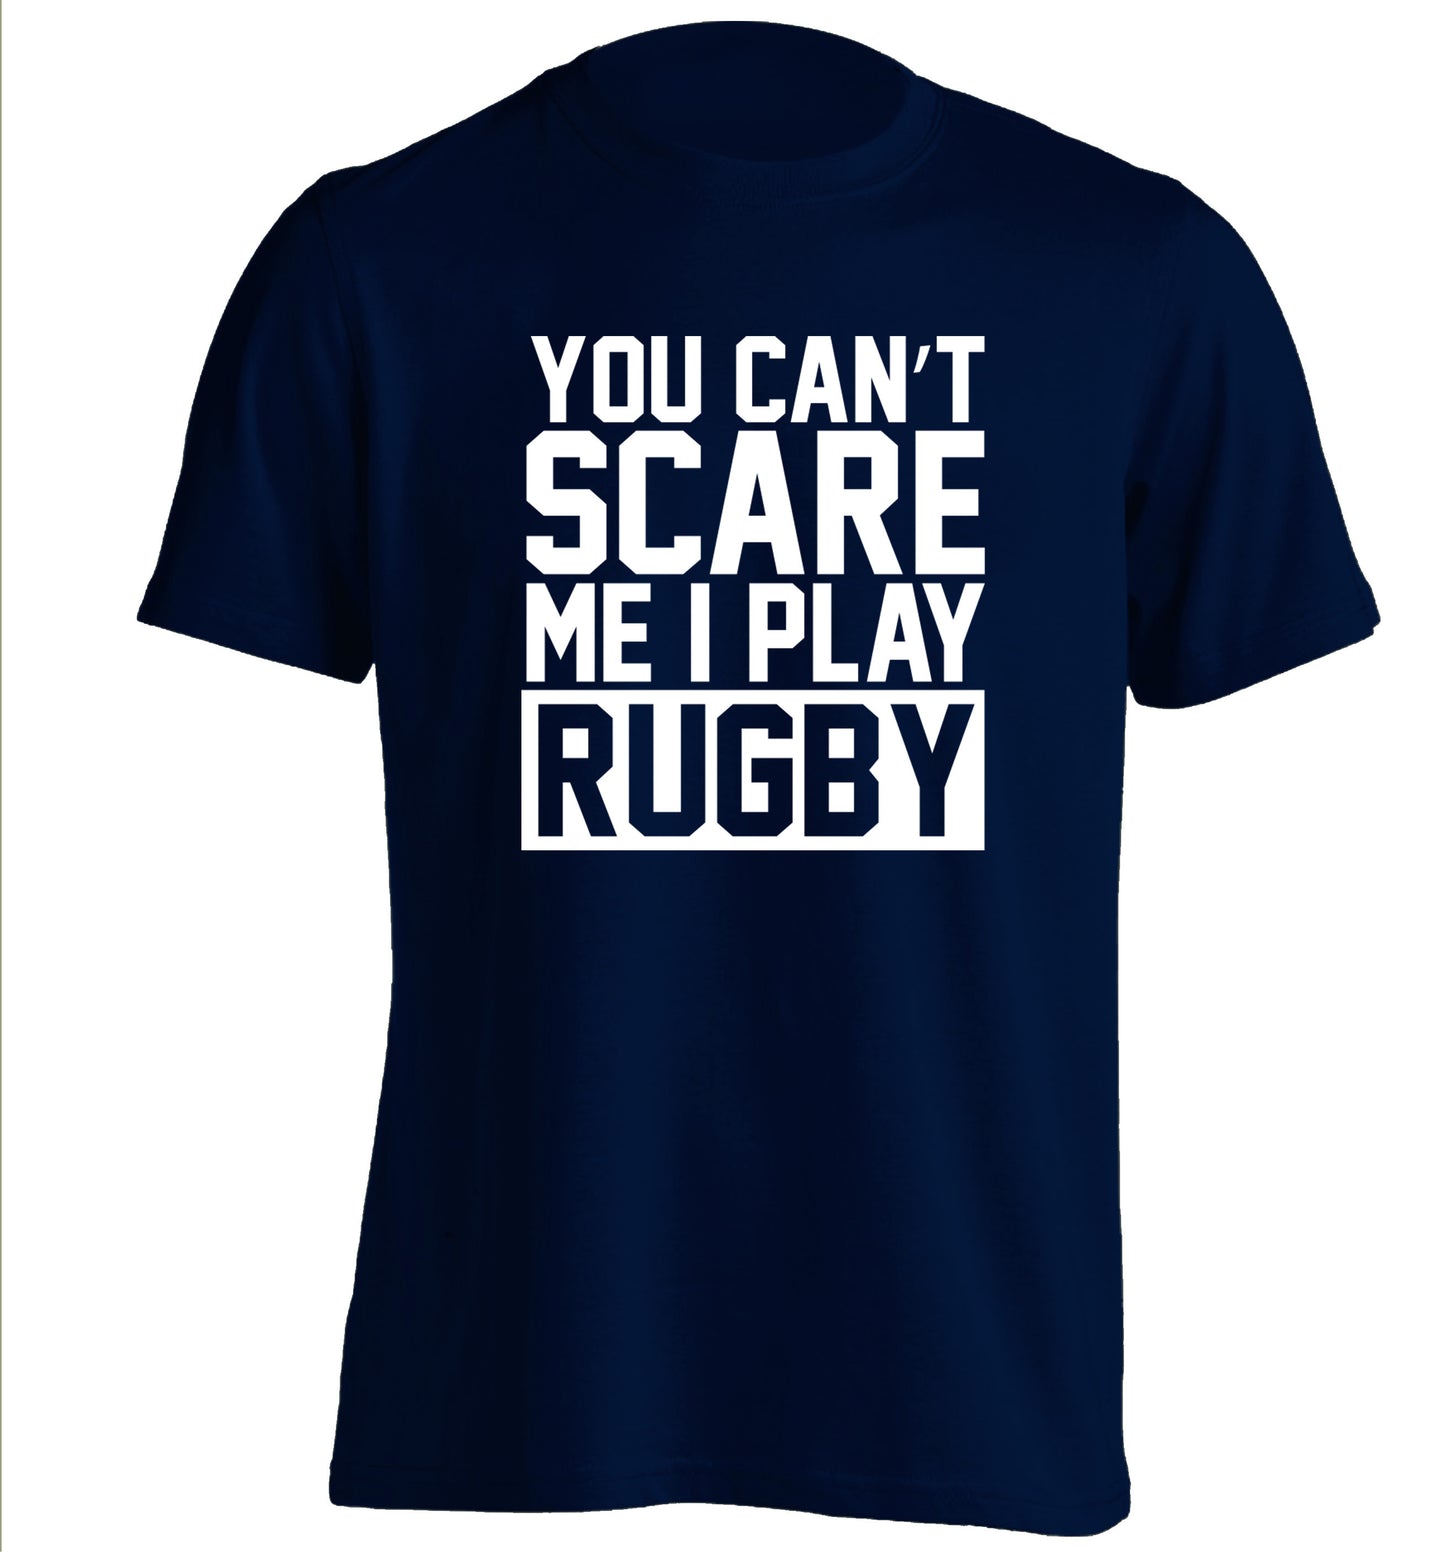 You can't scare me I play rugby adults unisex navy Tshirt 2XL